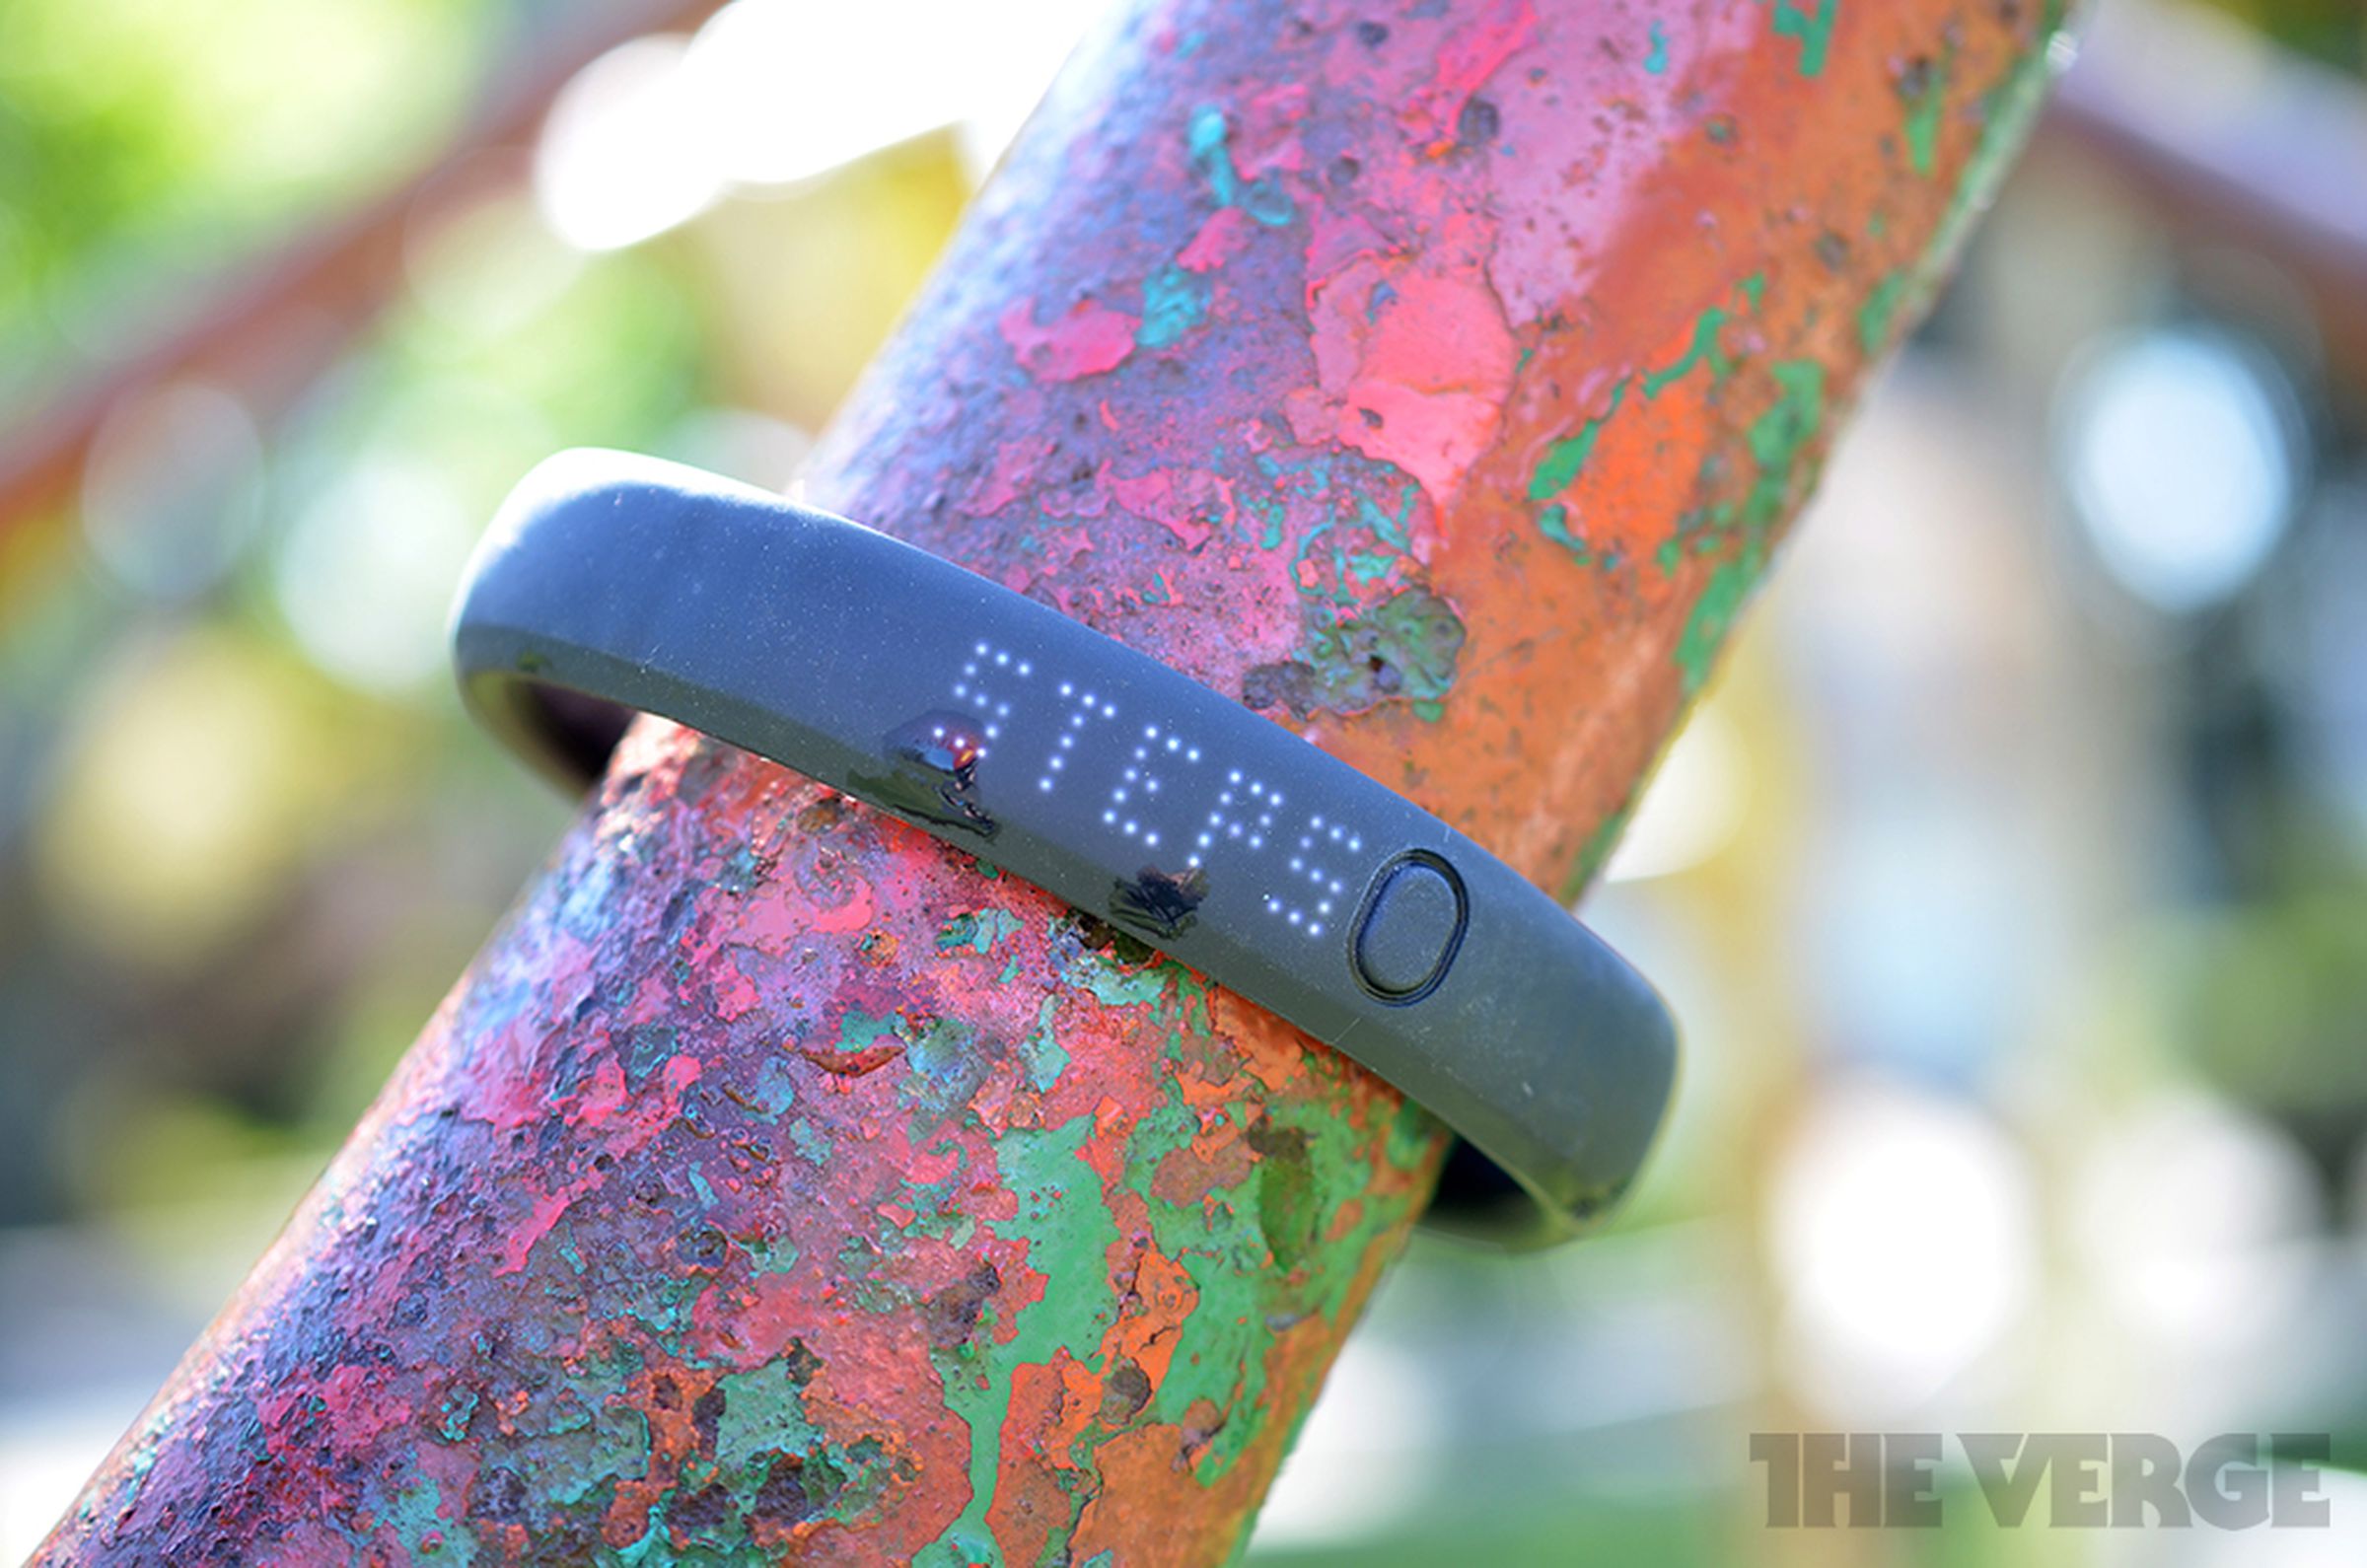 Nike+ FuelBand review pictures